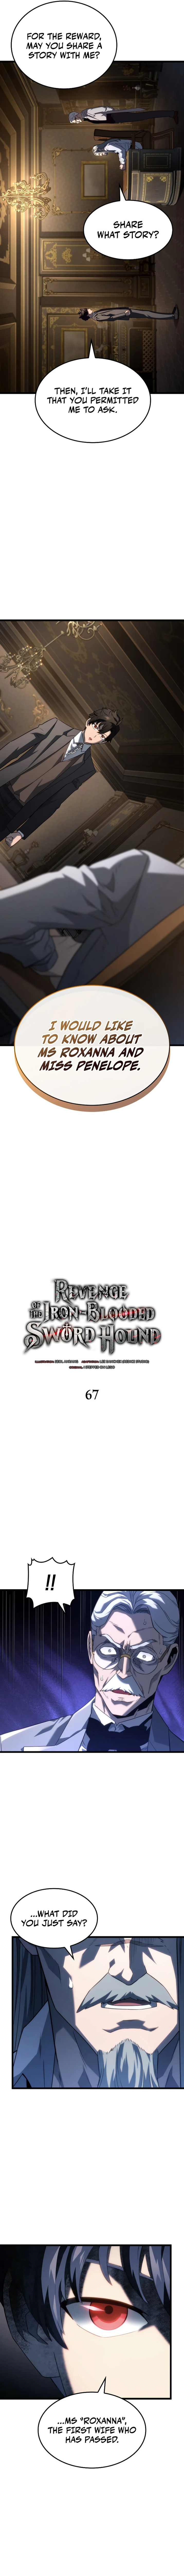 lets read your favorit Read Revenge of the Iron-Blooded Sword Hound Chapter 67 Online Chapter  web comic toon manga online here on meowscan